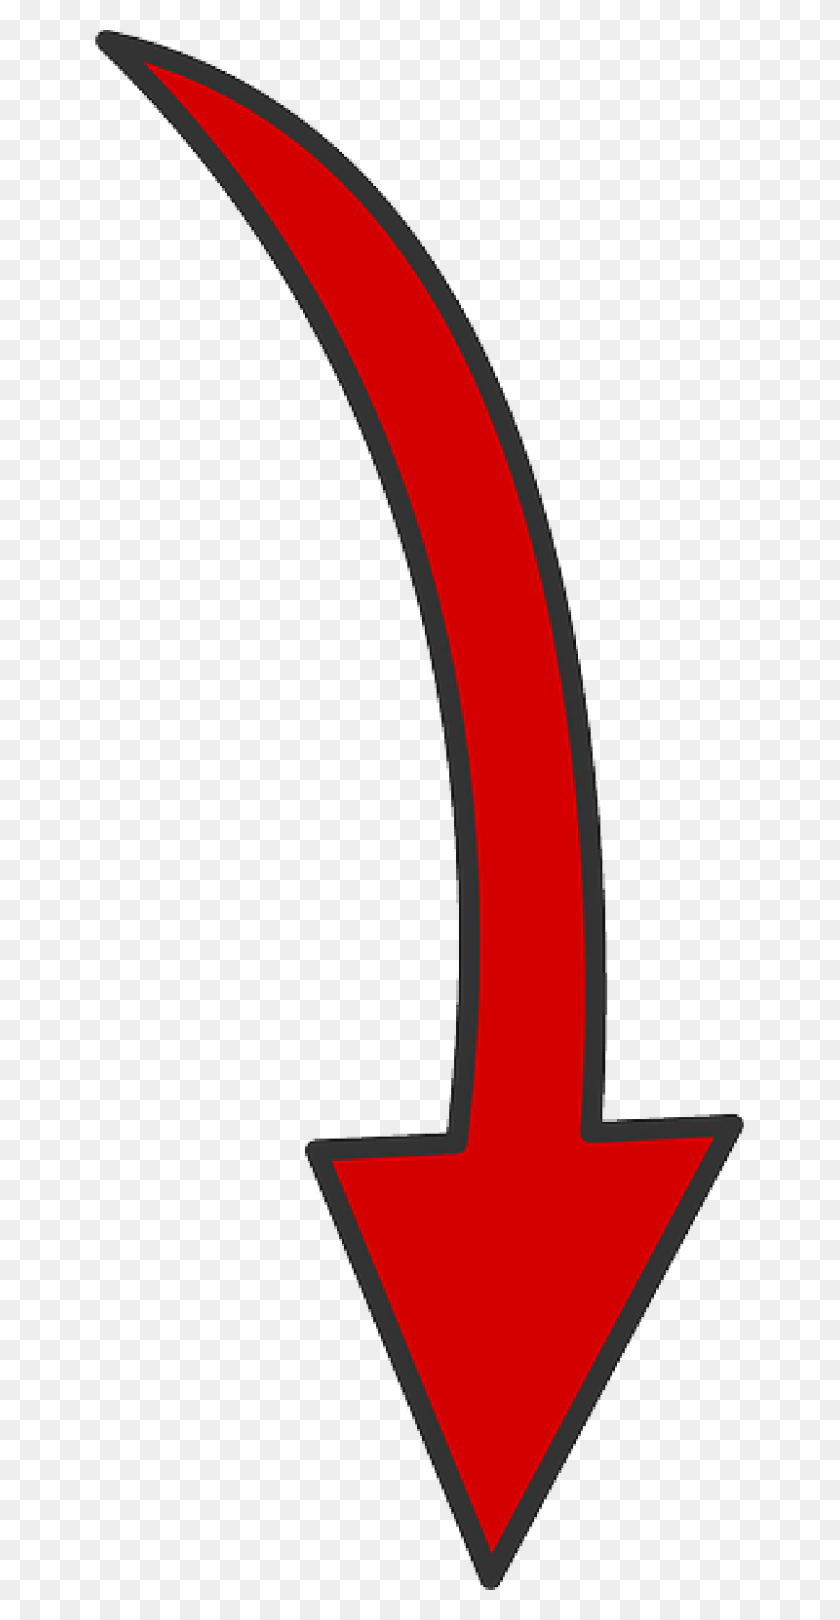 800x1600 Red Curved Arrow Png White Pictures To Pin Free Image - Red Curved Arrow PNG